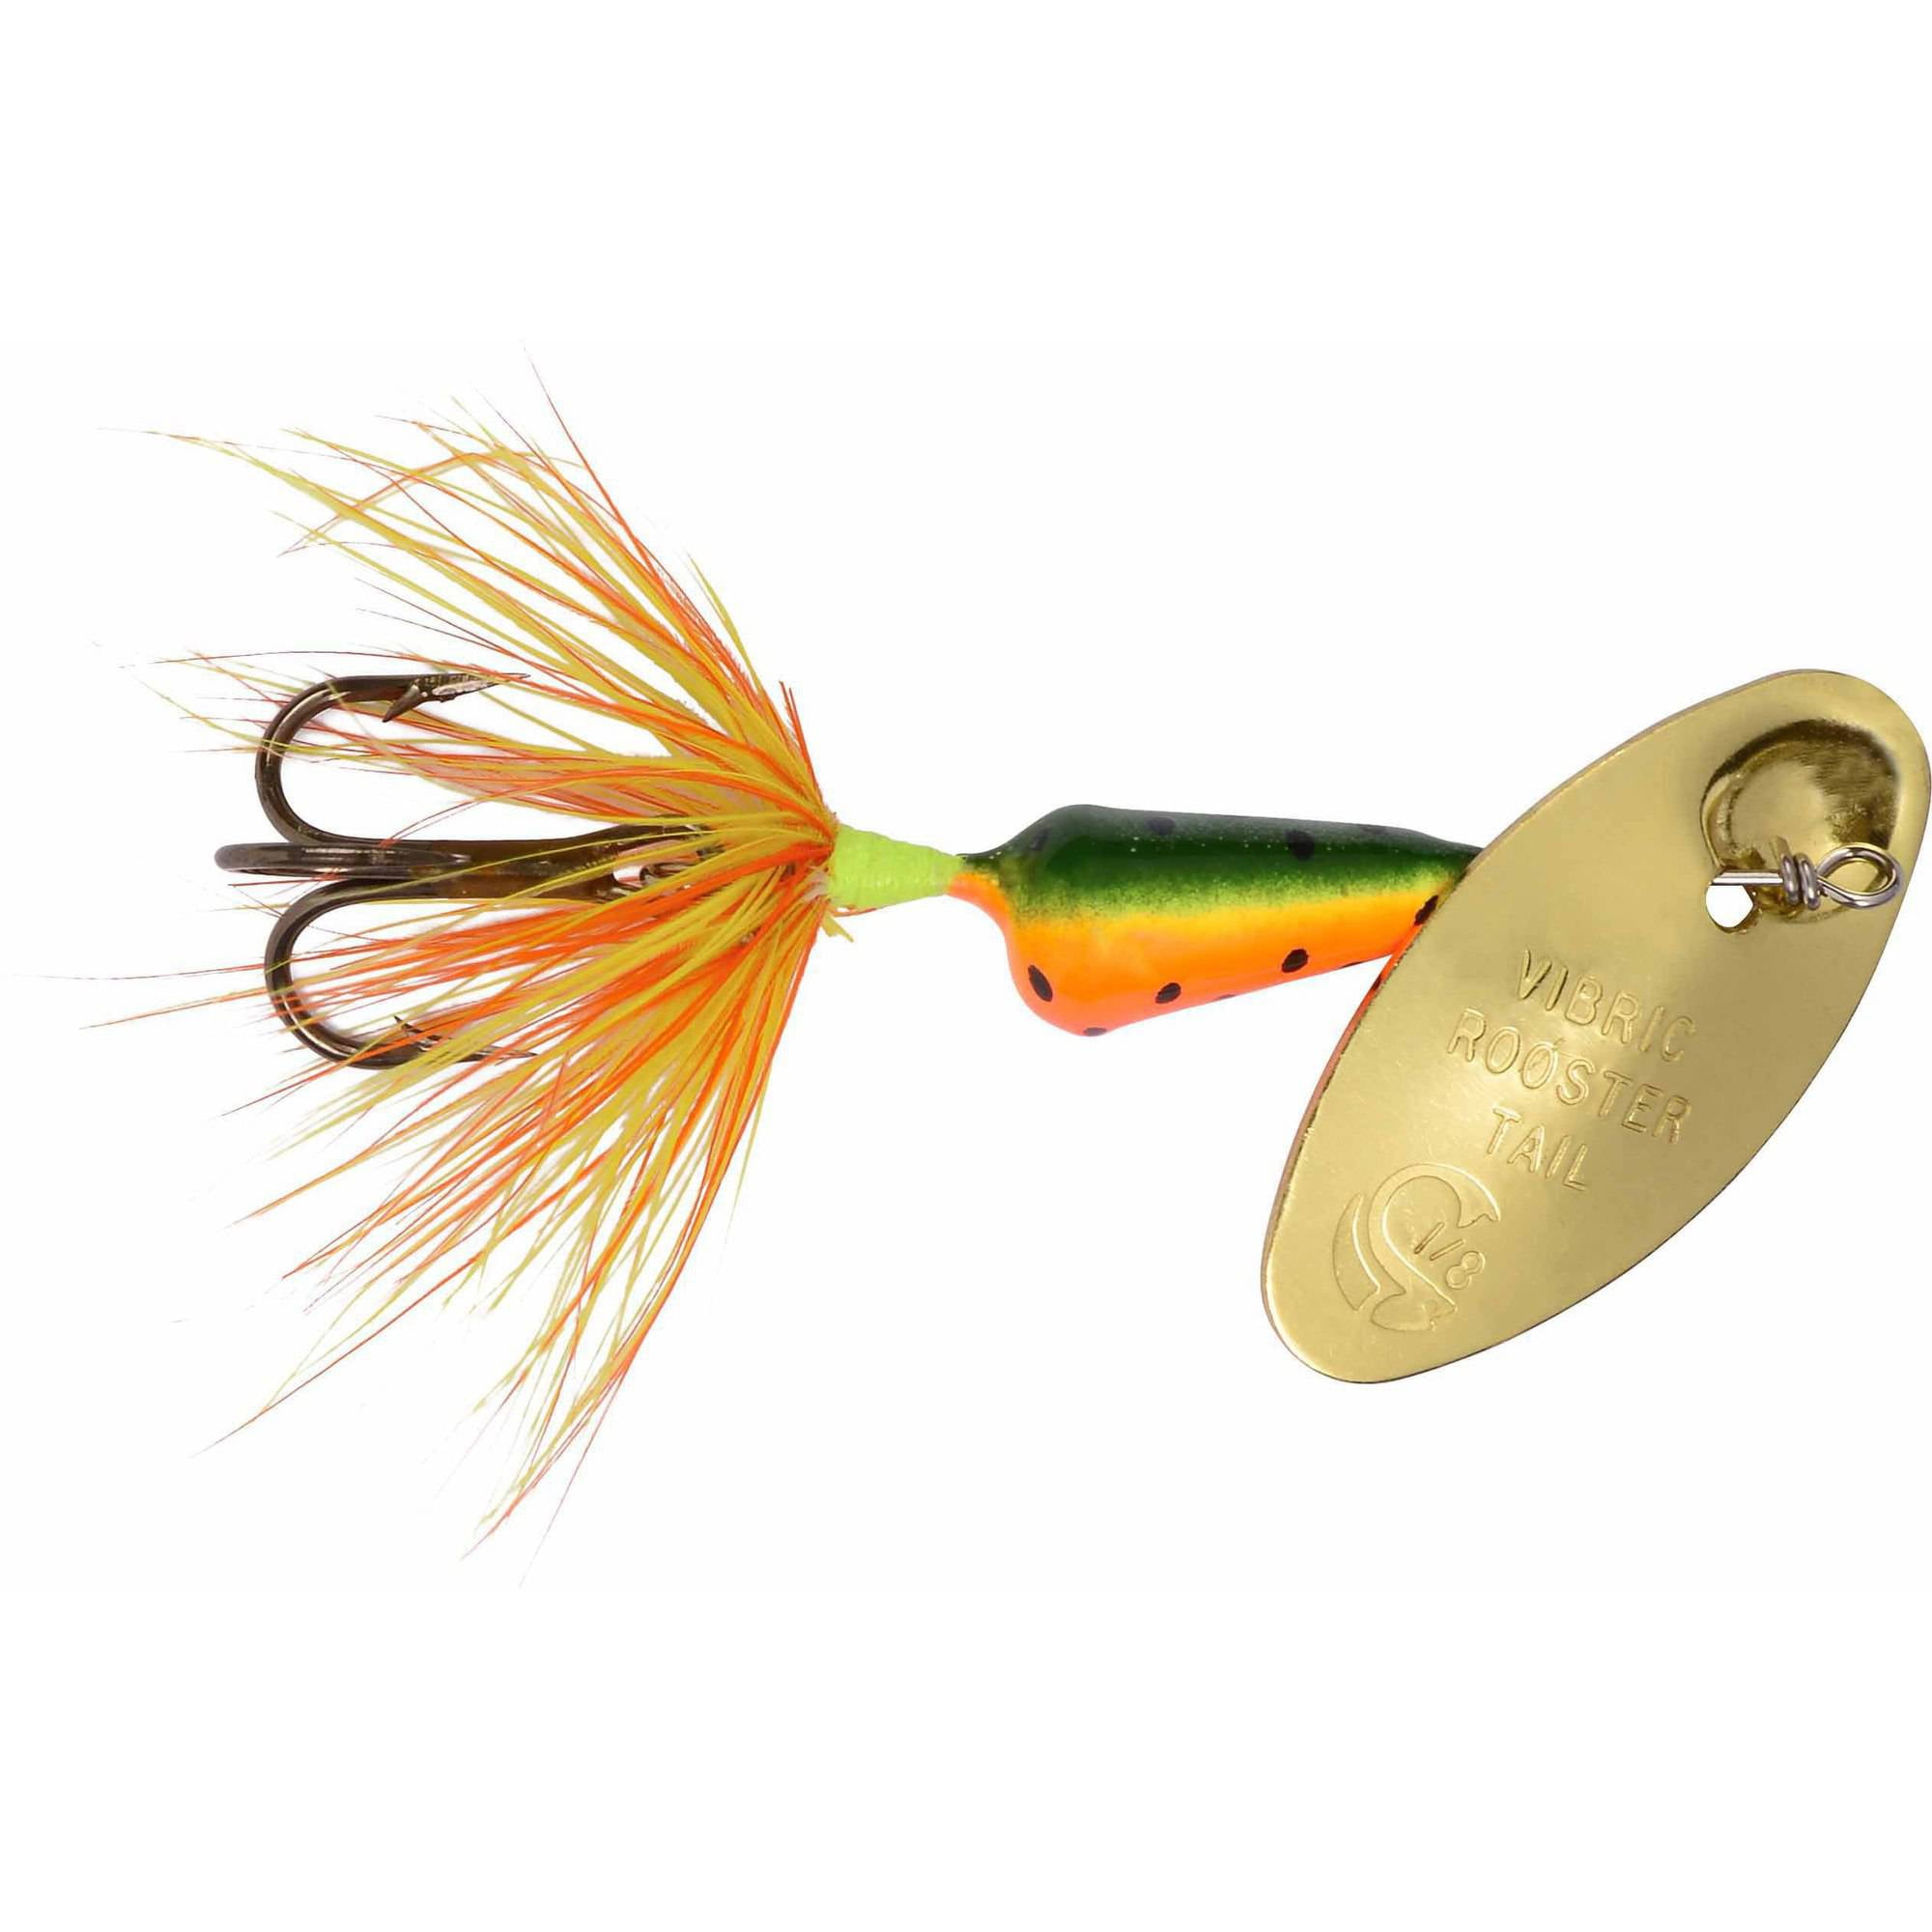 Worden's Vibric Rooster Tail, 1/2 oz, Firetiger